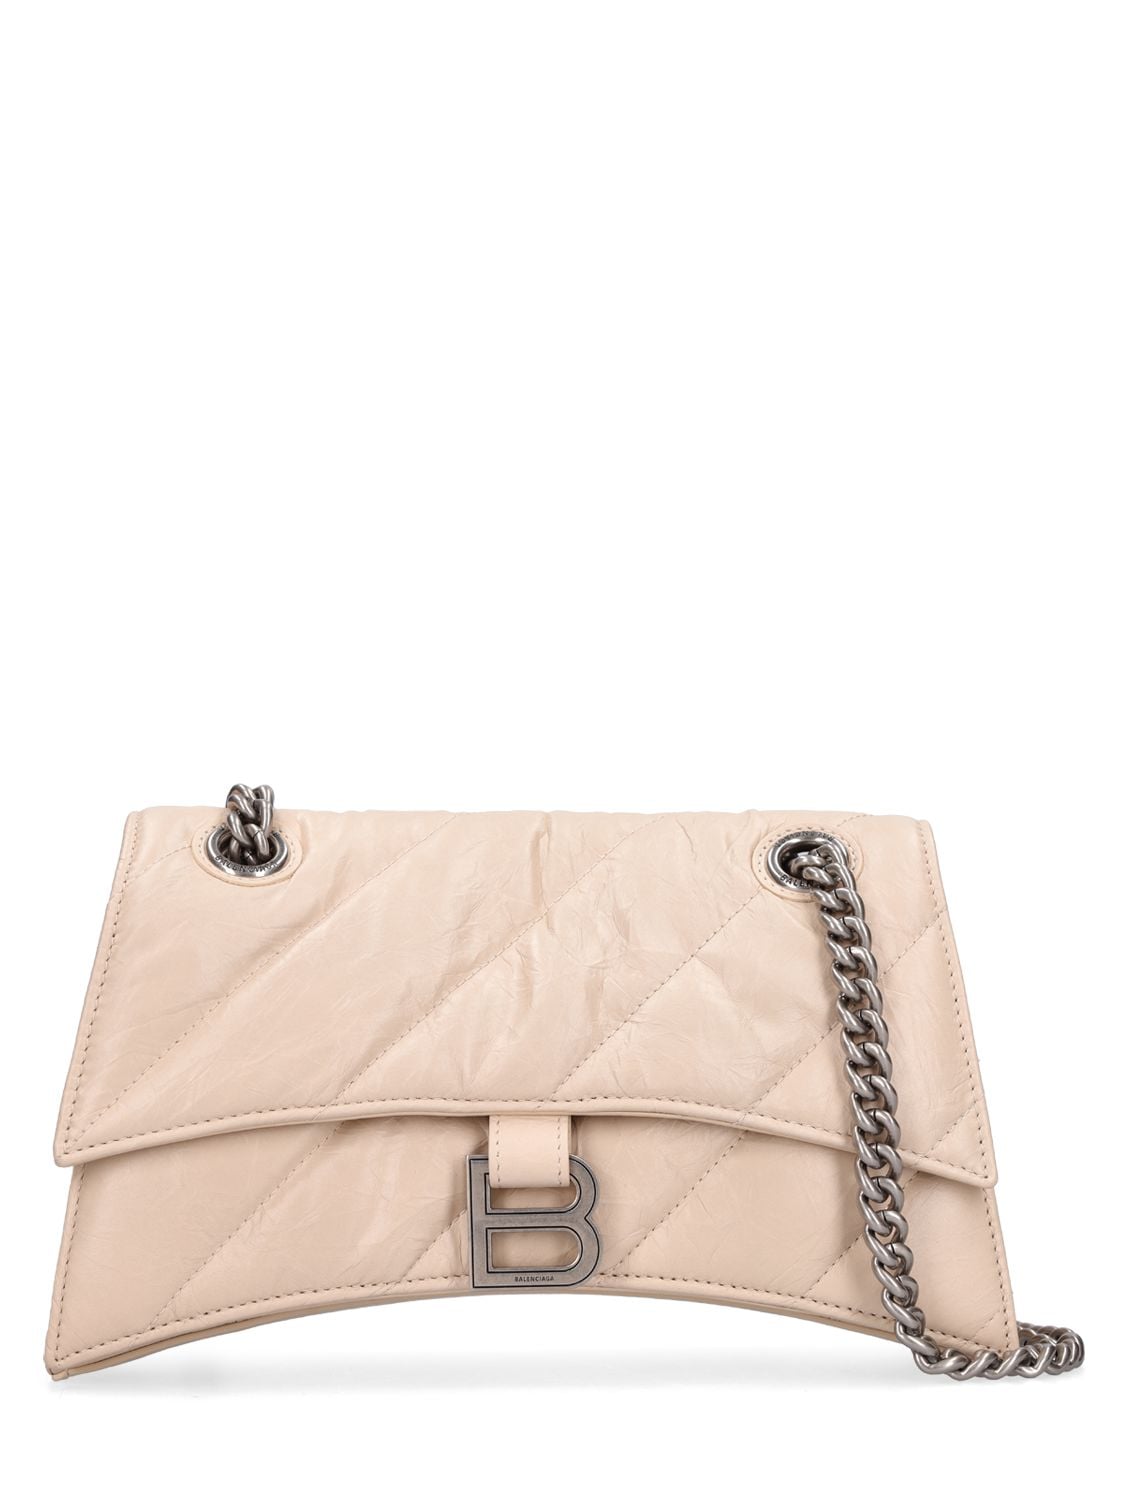 BALENCIAGA Small Crush Chain Quilted Leather Bag